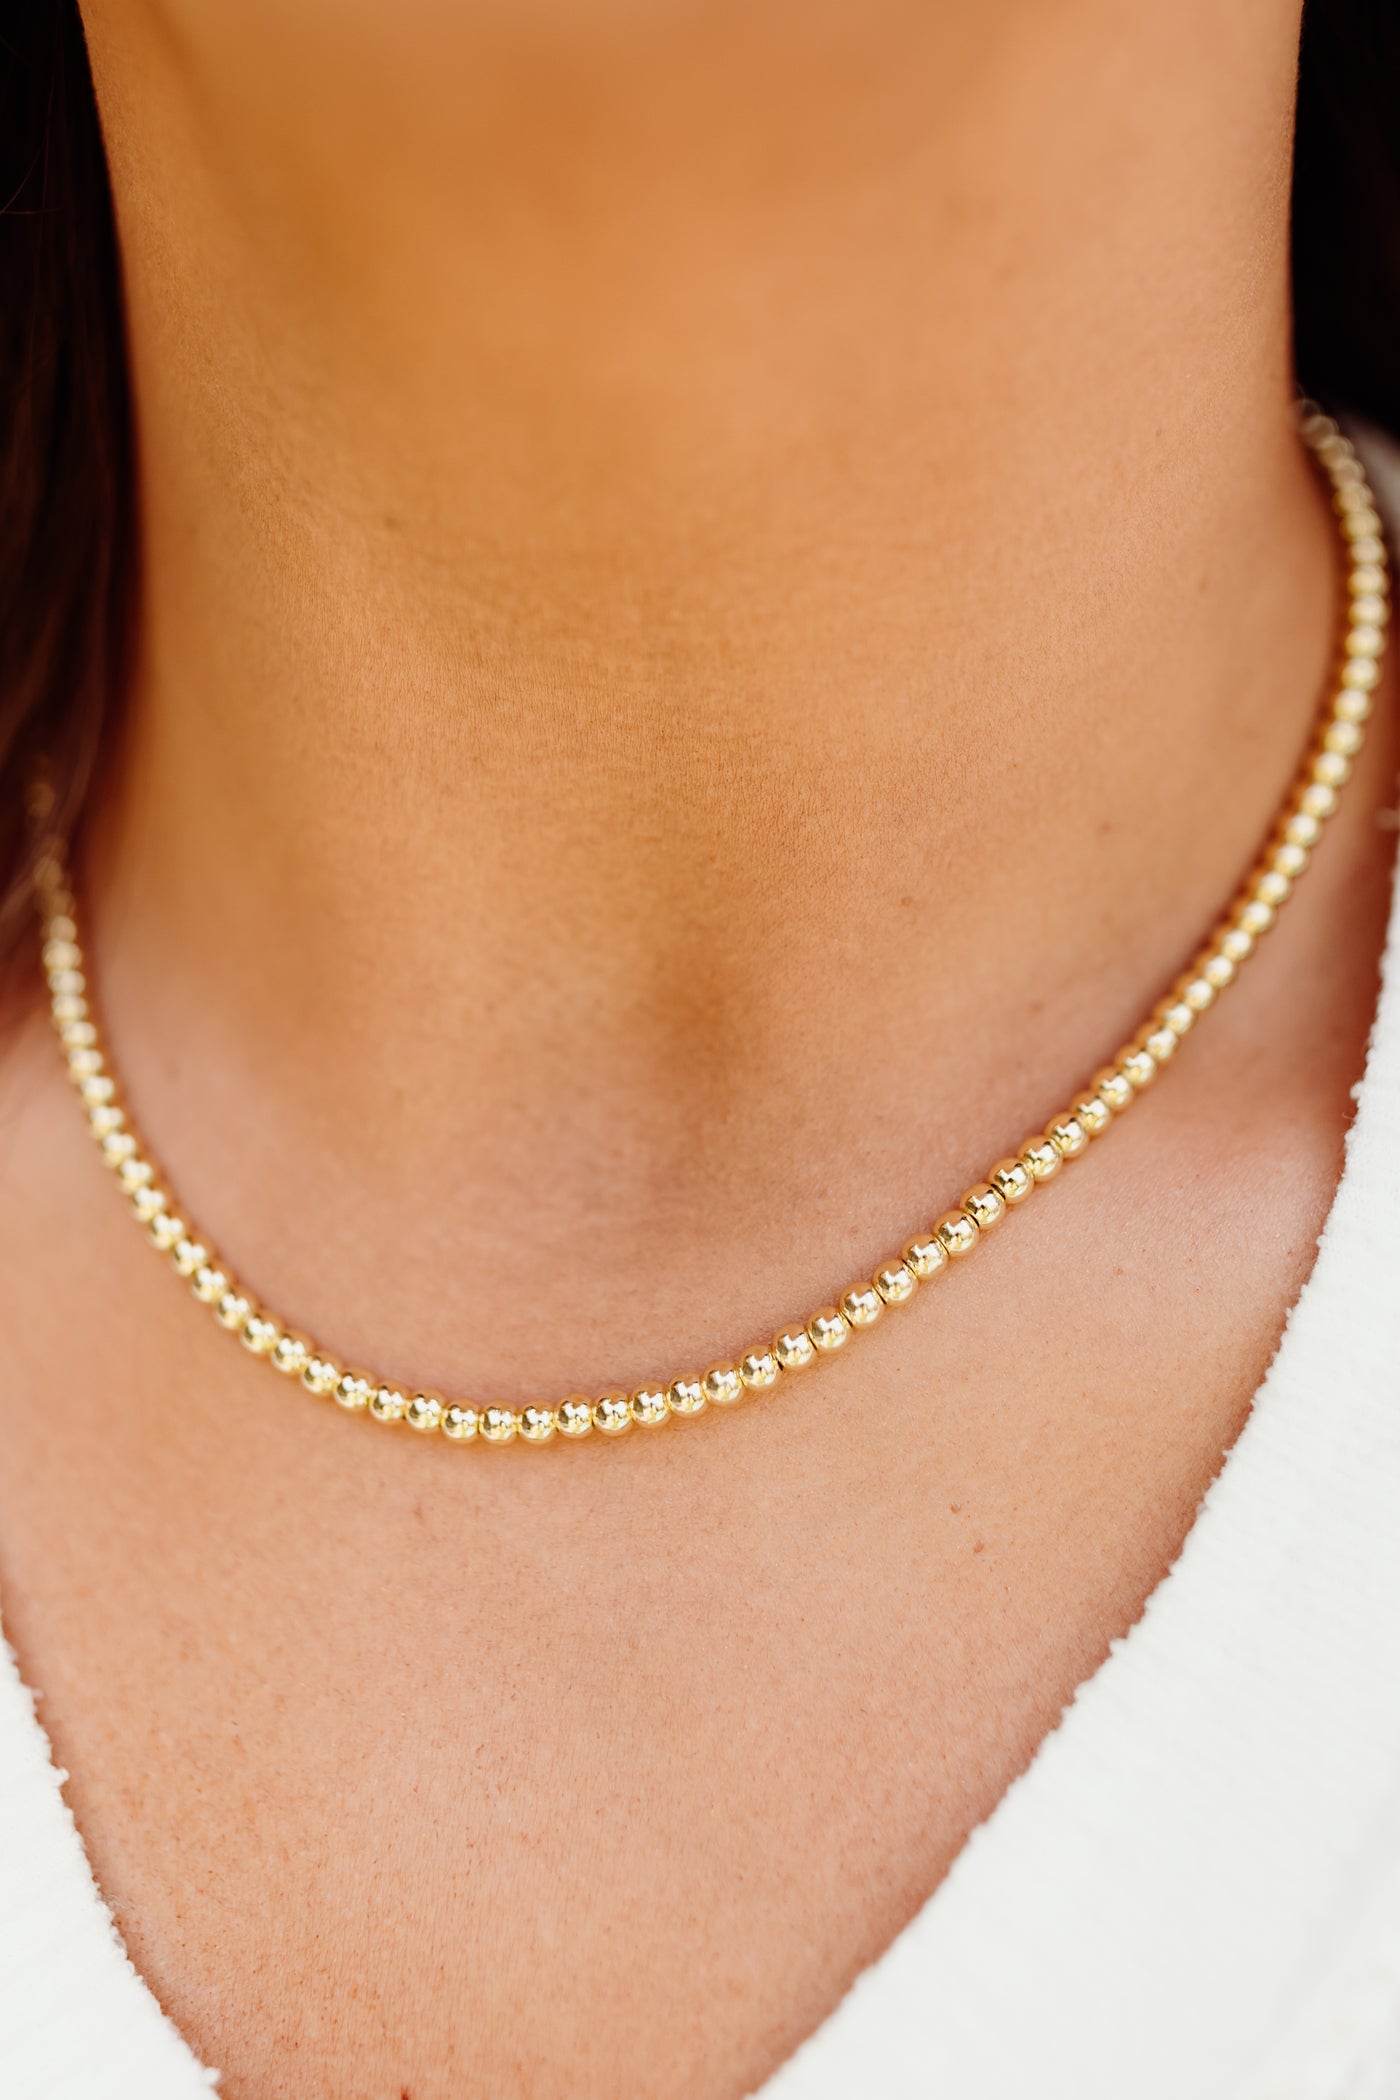 Gold Stainless Steel 4mm Beaded Chain Necklace